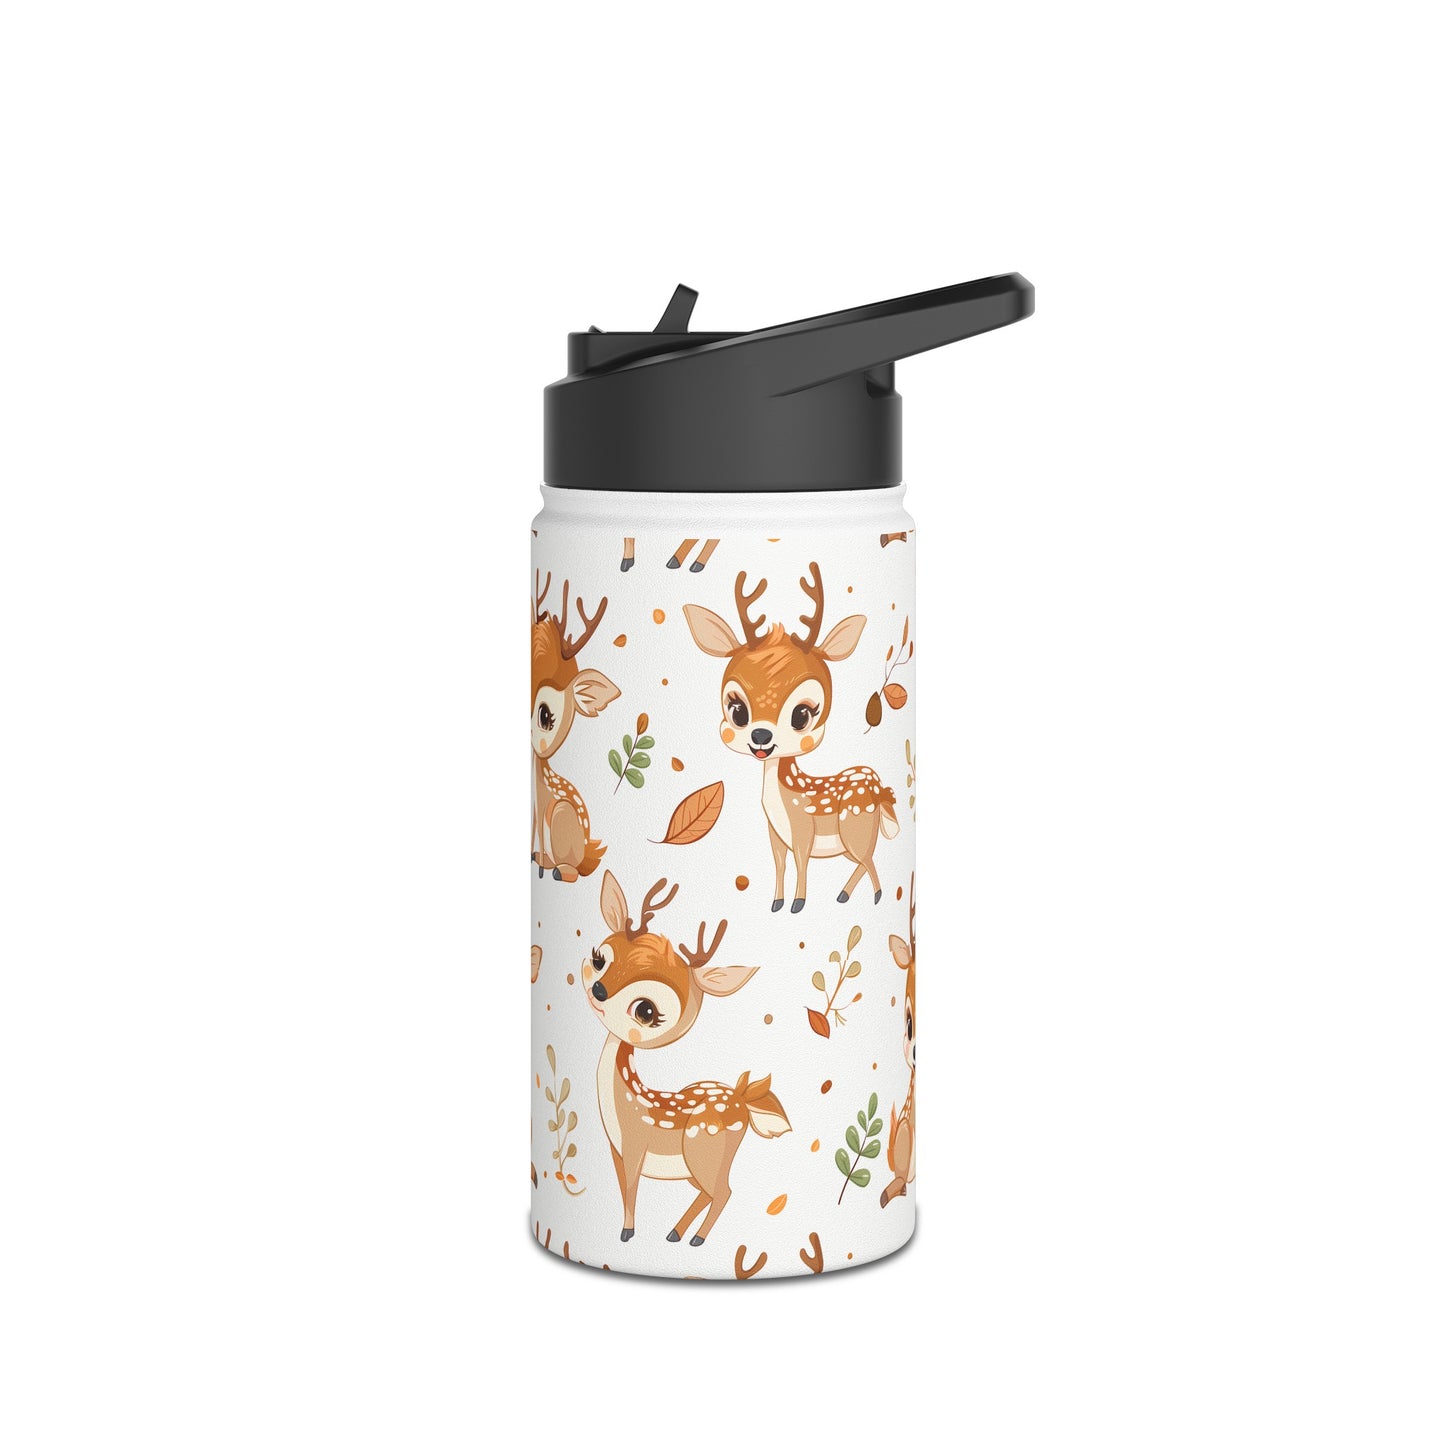 Insulated Water Bottle, 12oz, Cute Baby Deer - Double Walled Stainless Steel Thermos, Keeps Drinks Hot or Cold